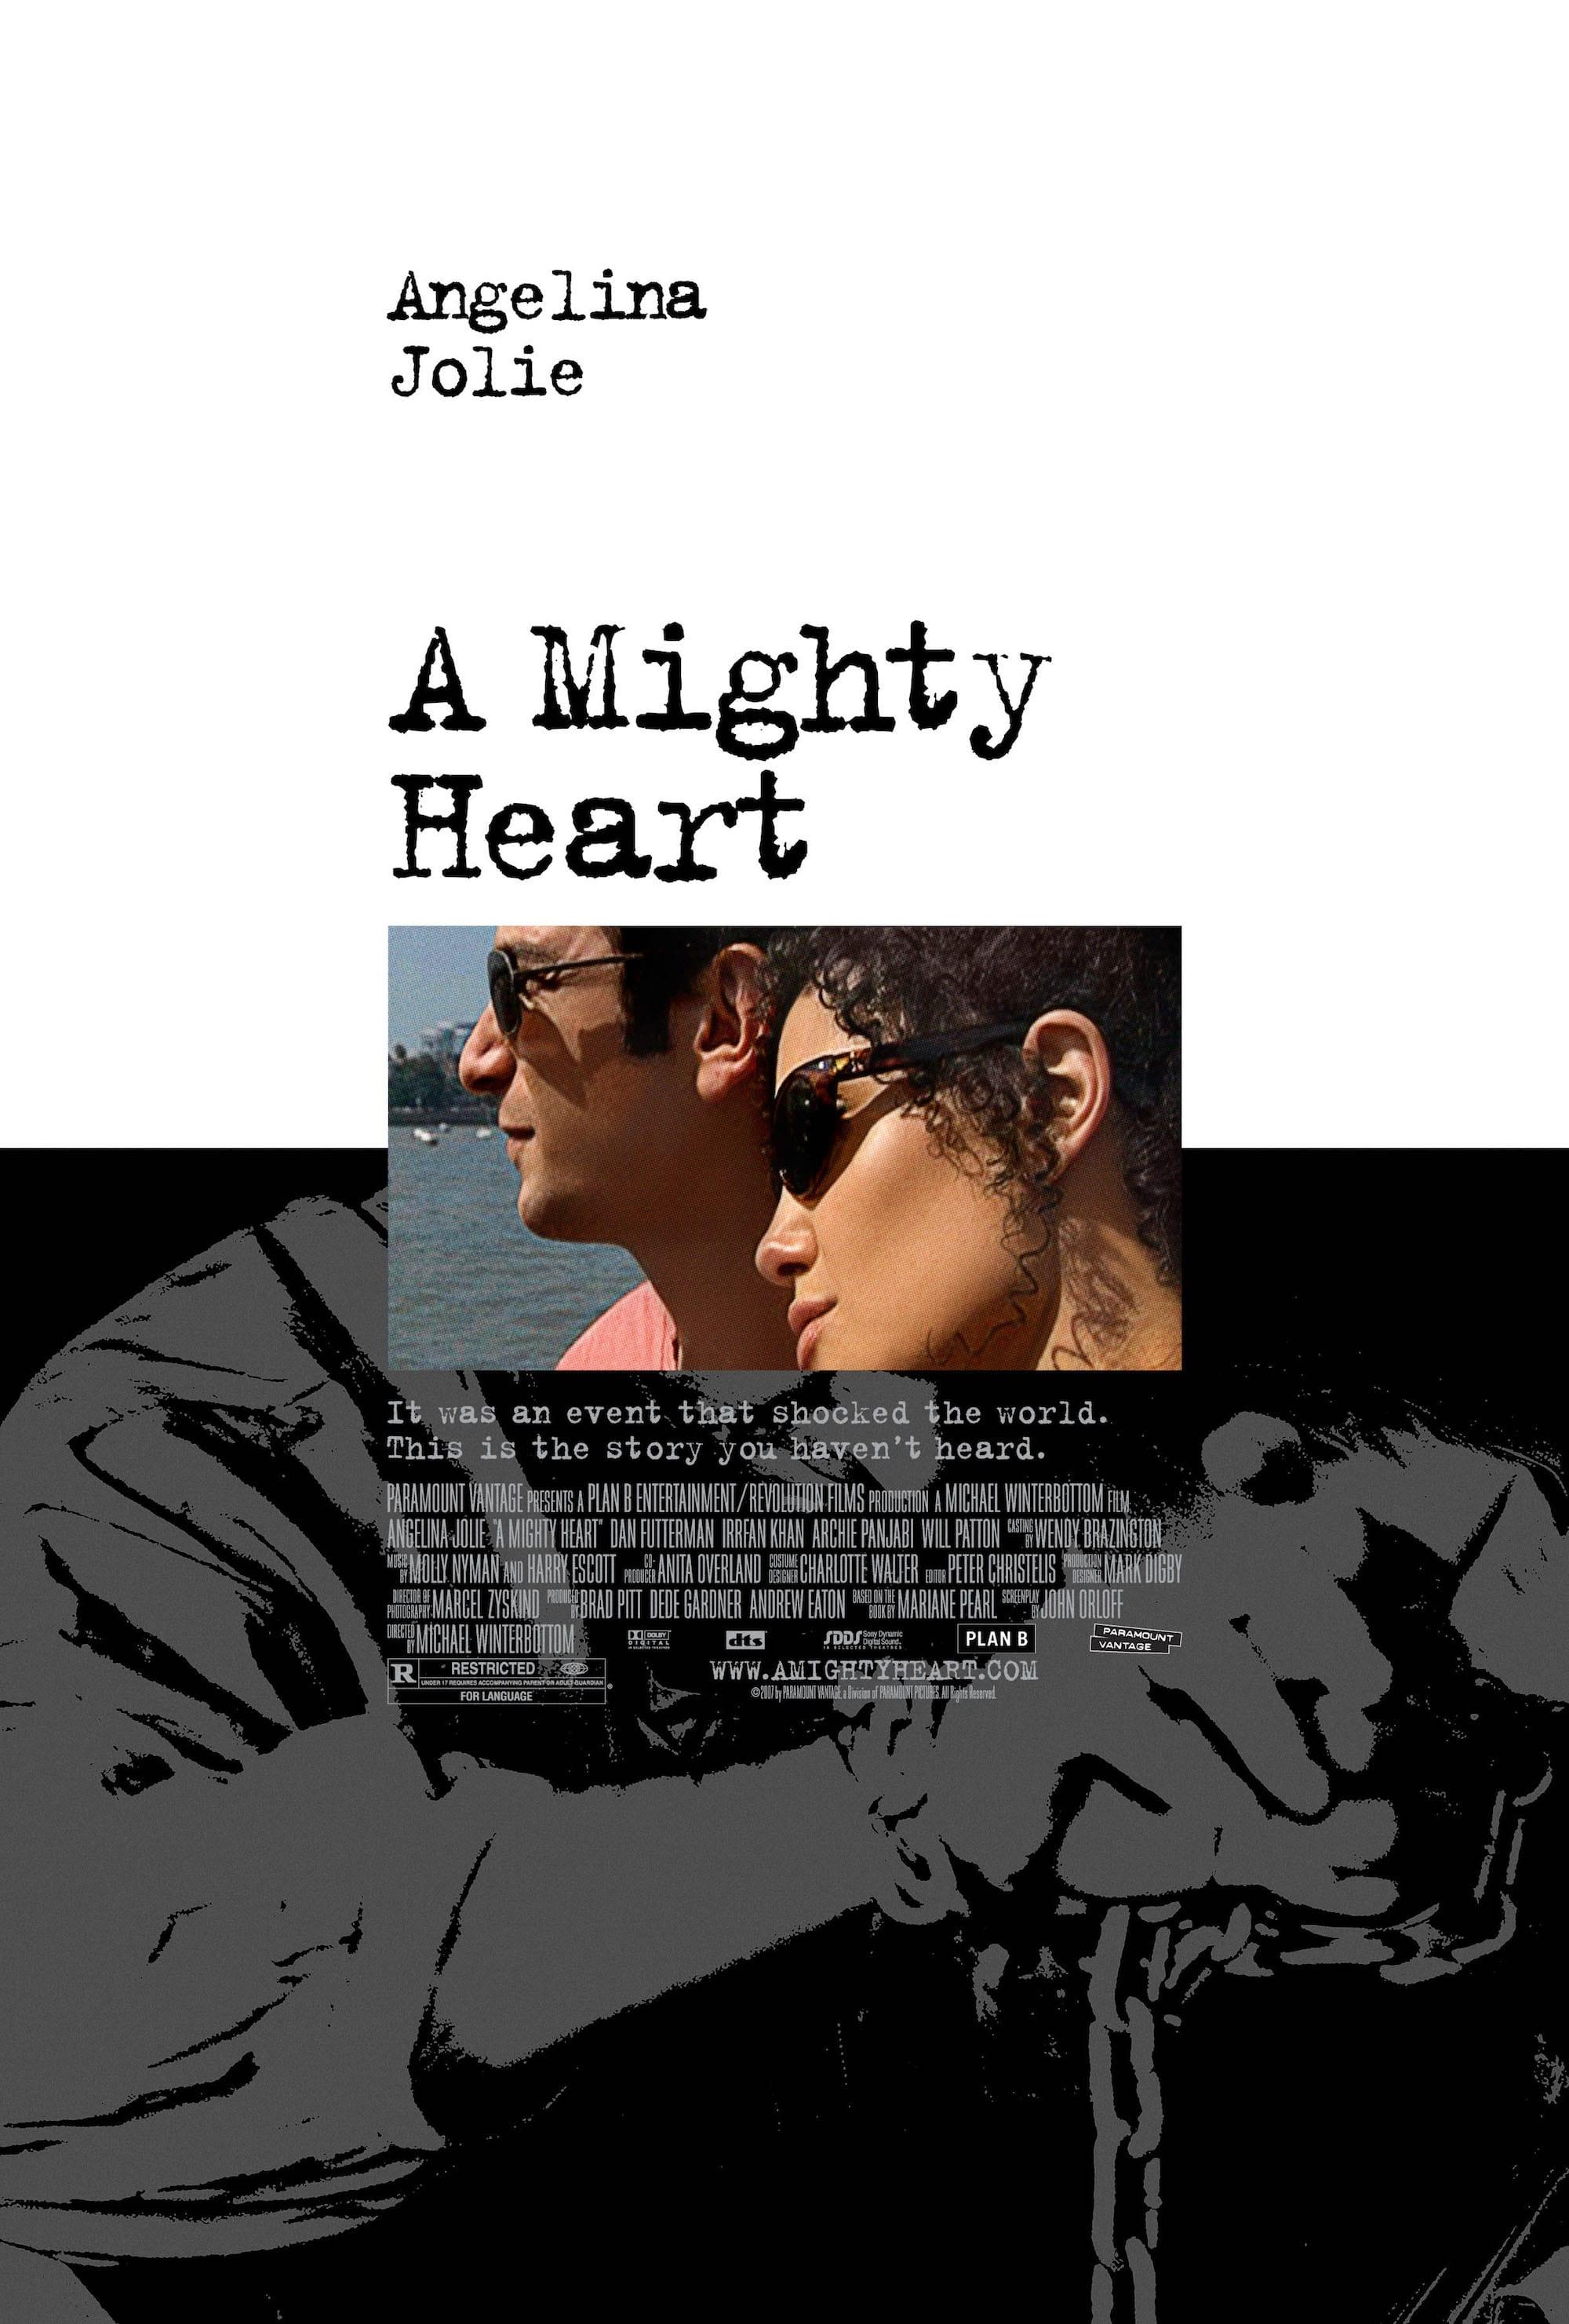 A Mighty Heart poster